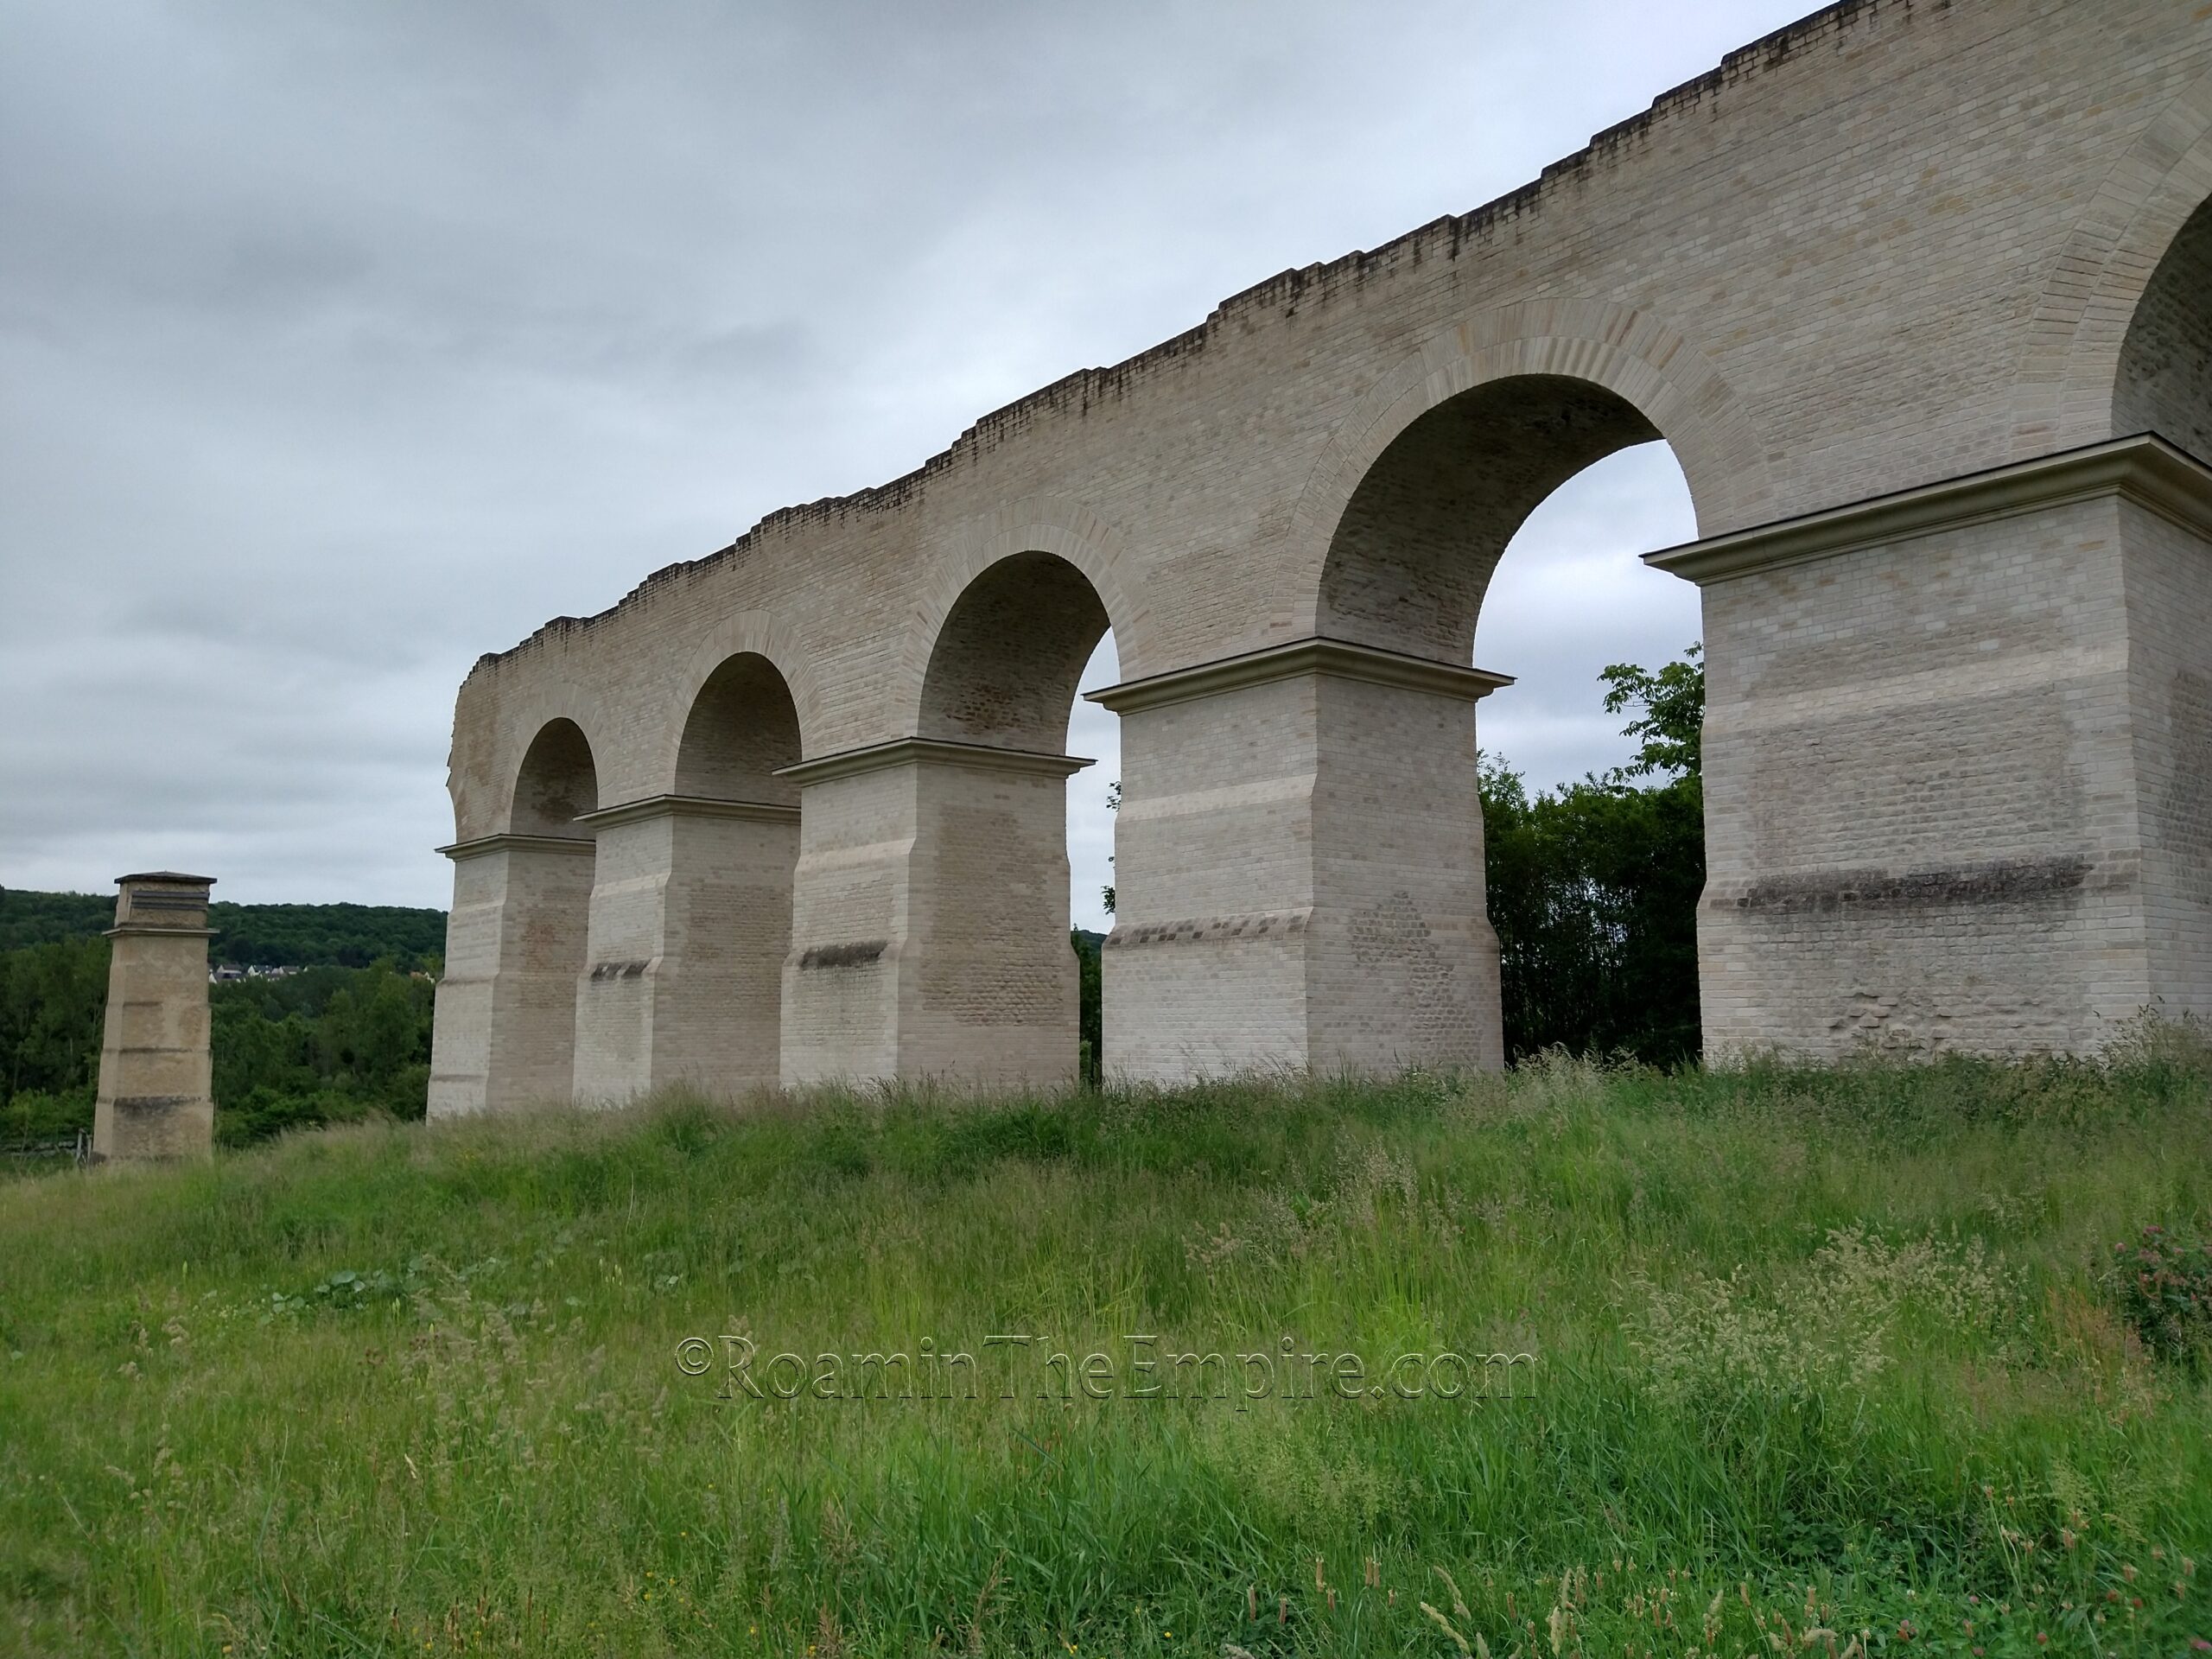 Ars-sur-Moselle (west bank) section of the aqueduct.